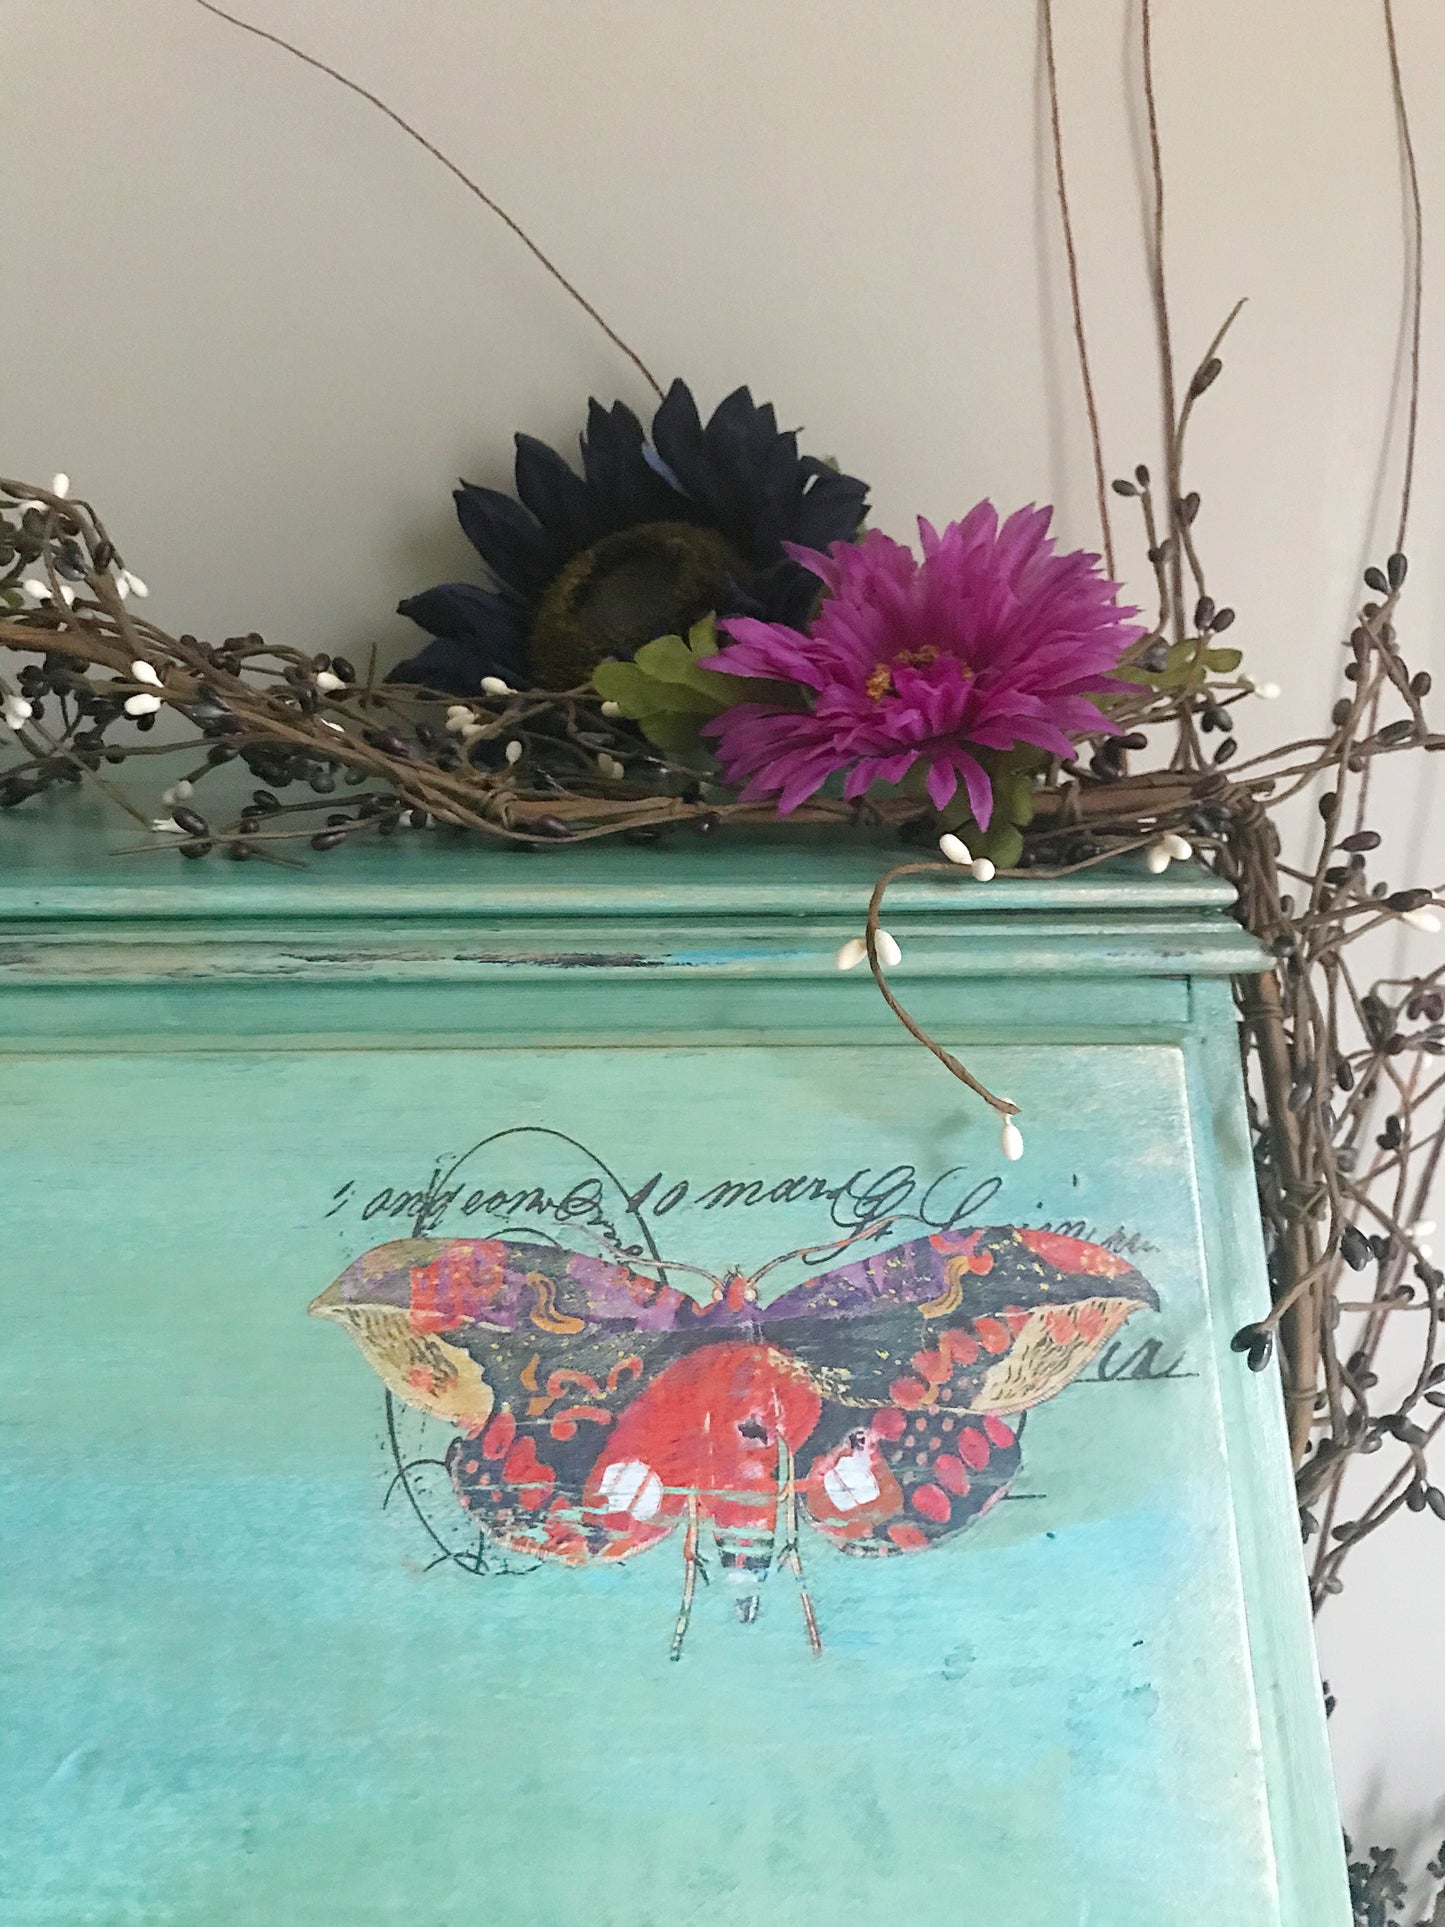 Gypsy Butterfly Antique Secretary Desk - Blue- Green - Boho chic - furniture - hand painted - original - one of a kind